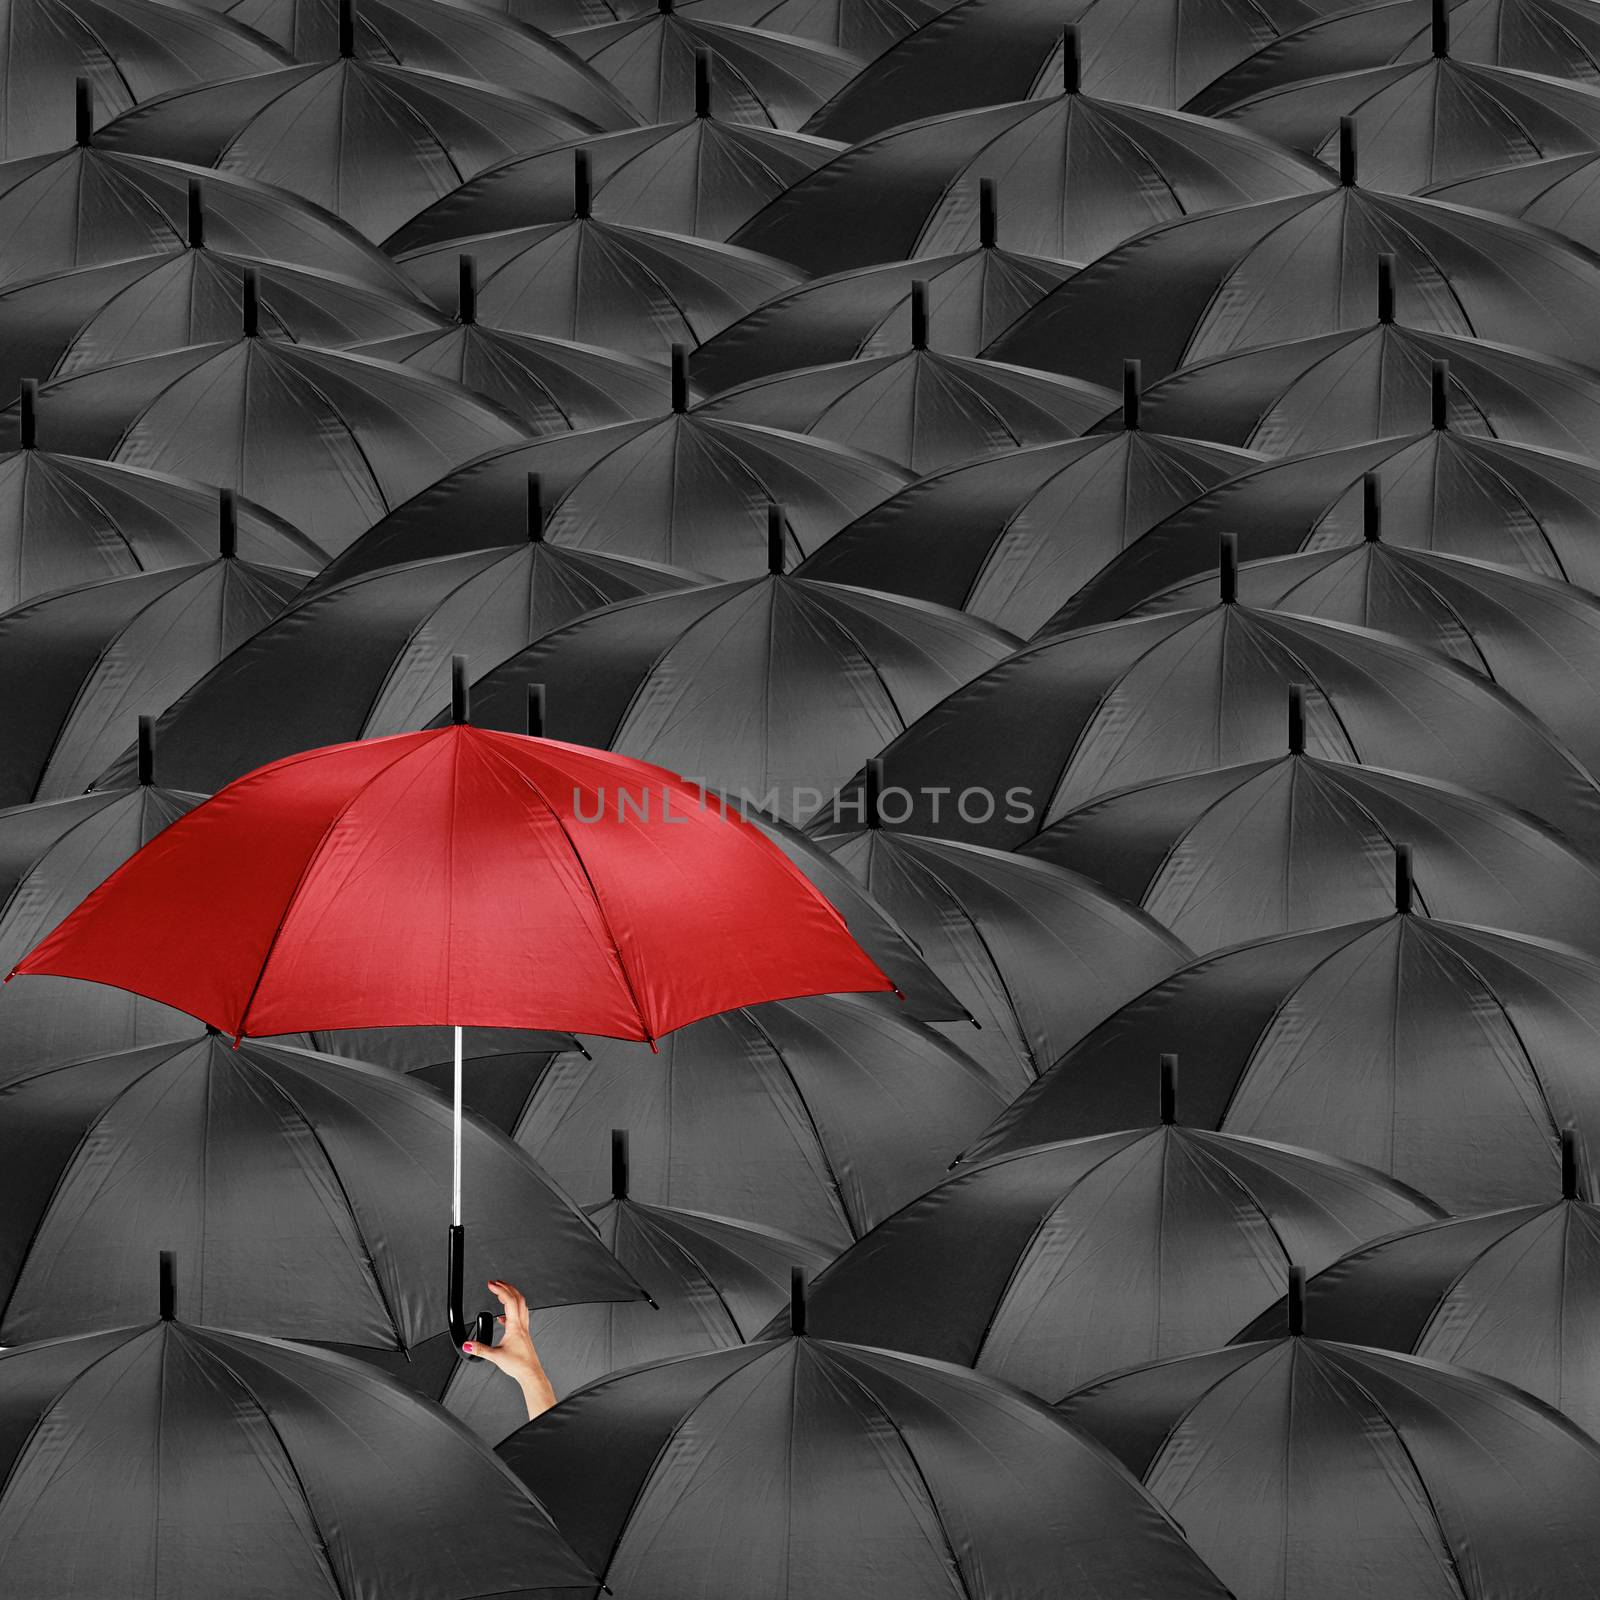 A red umbrella in the midst of many black umbrellas